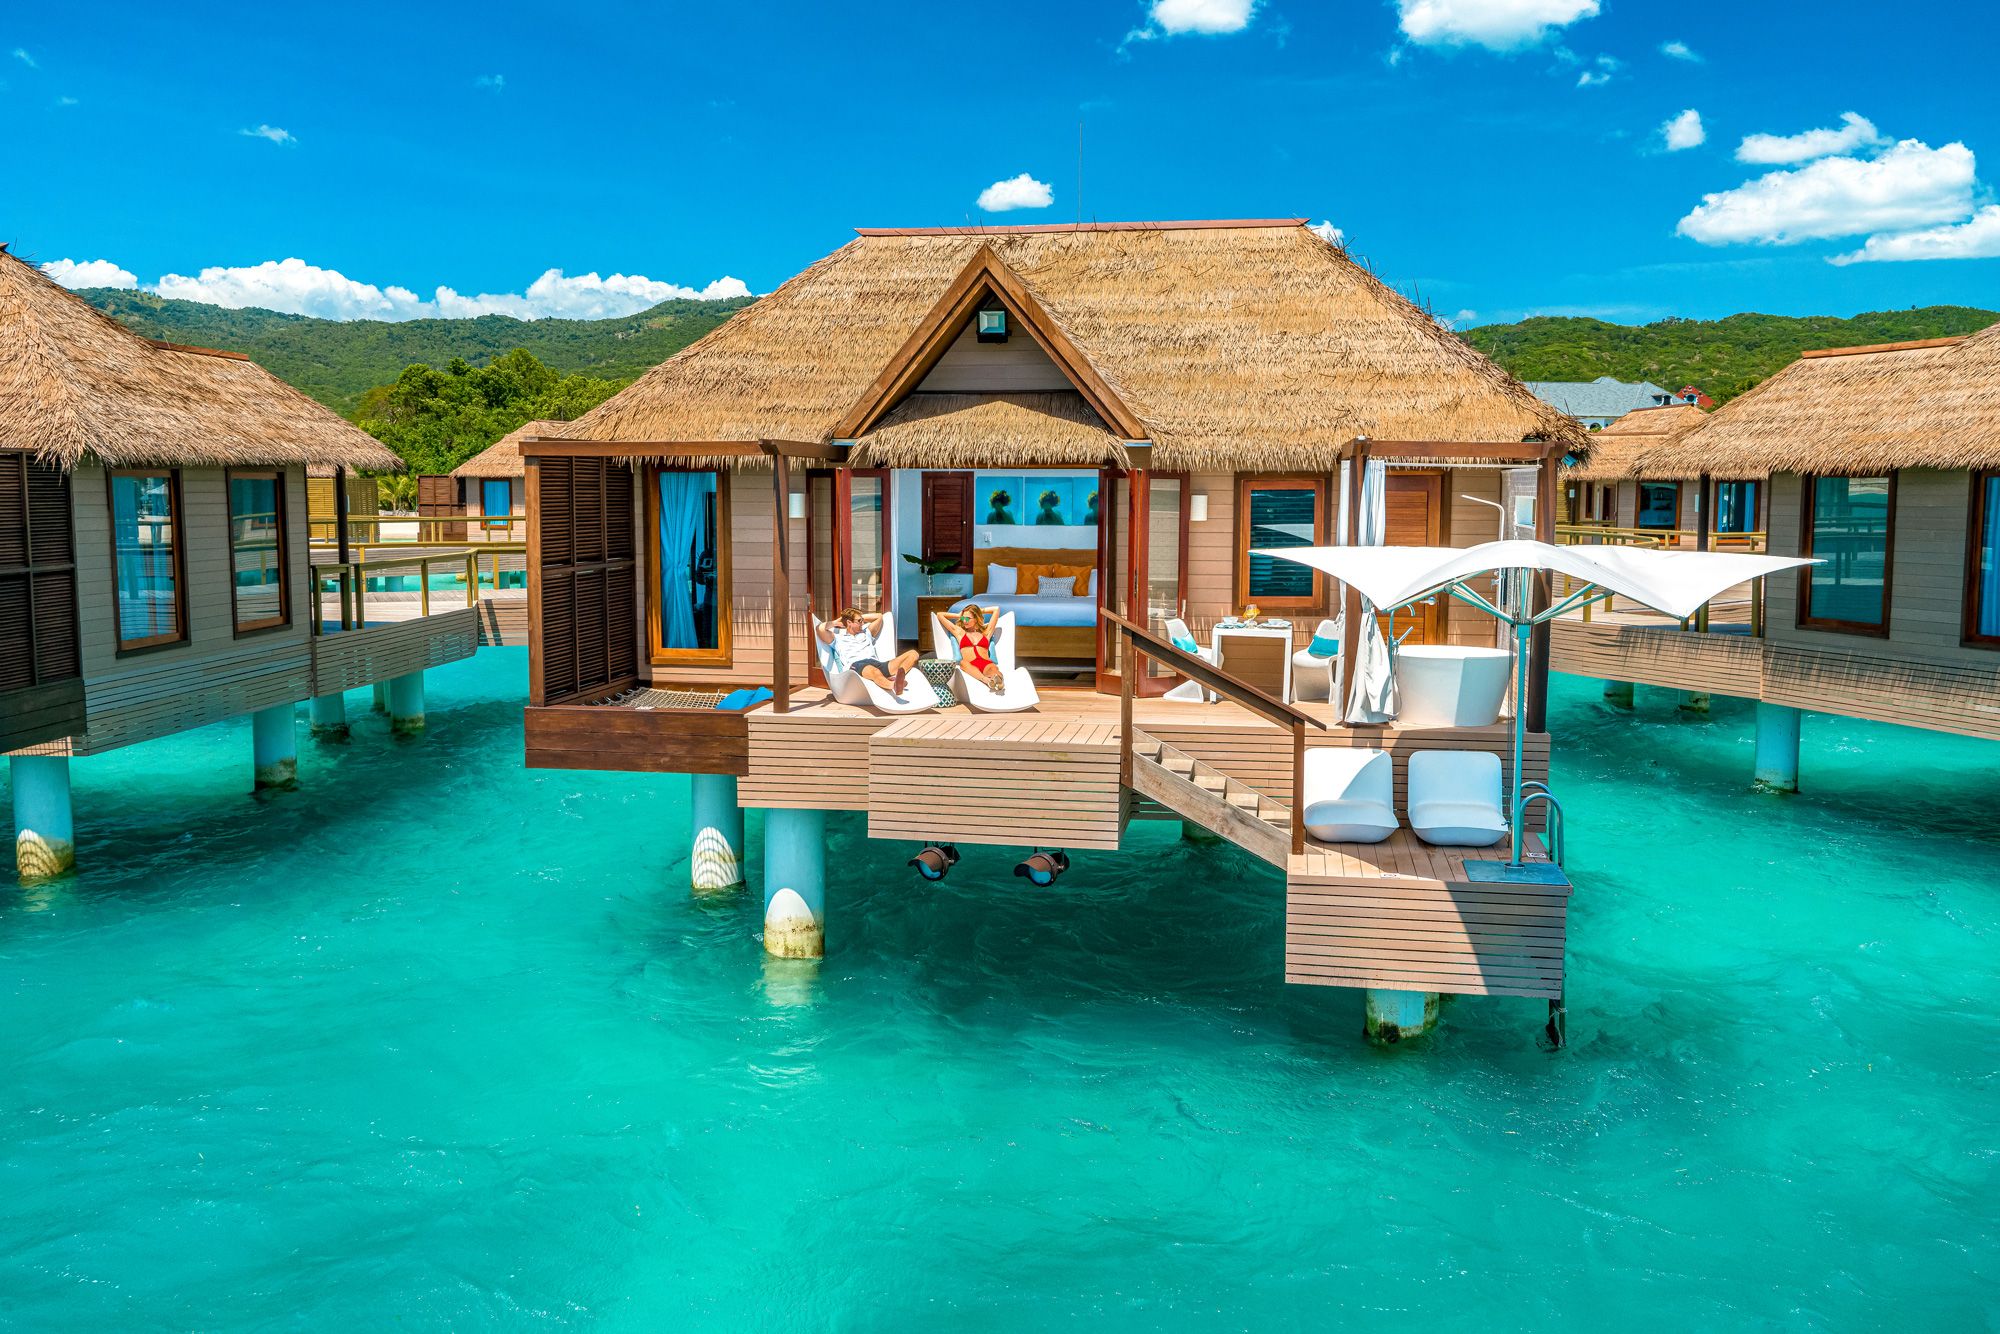 Sandals South Coast Over Water Bungalow